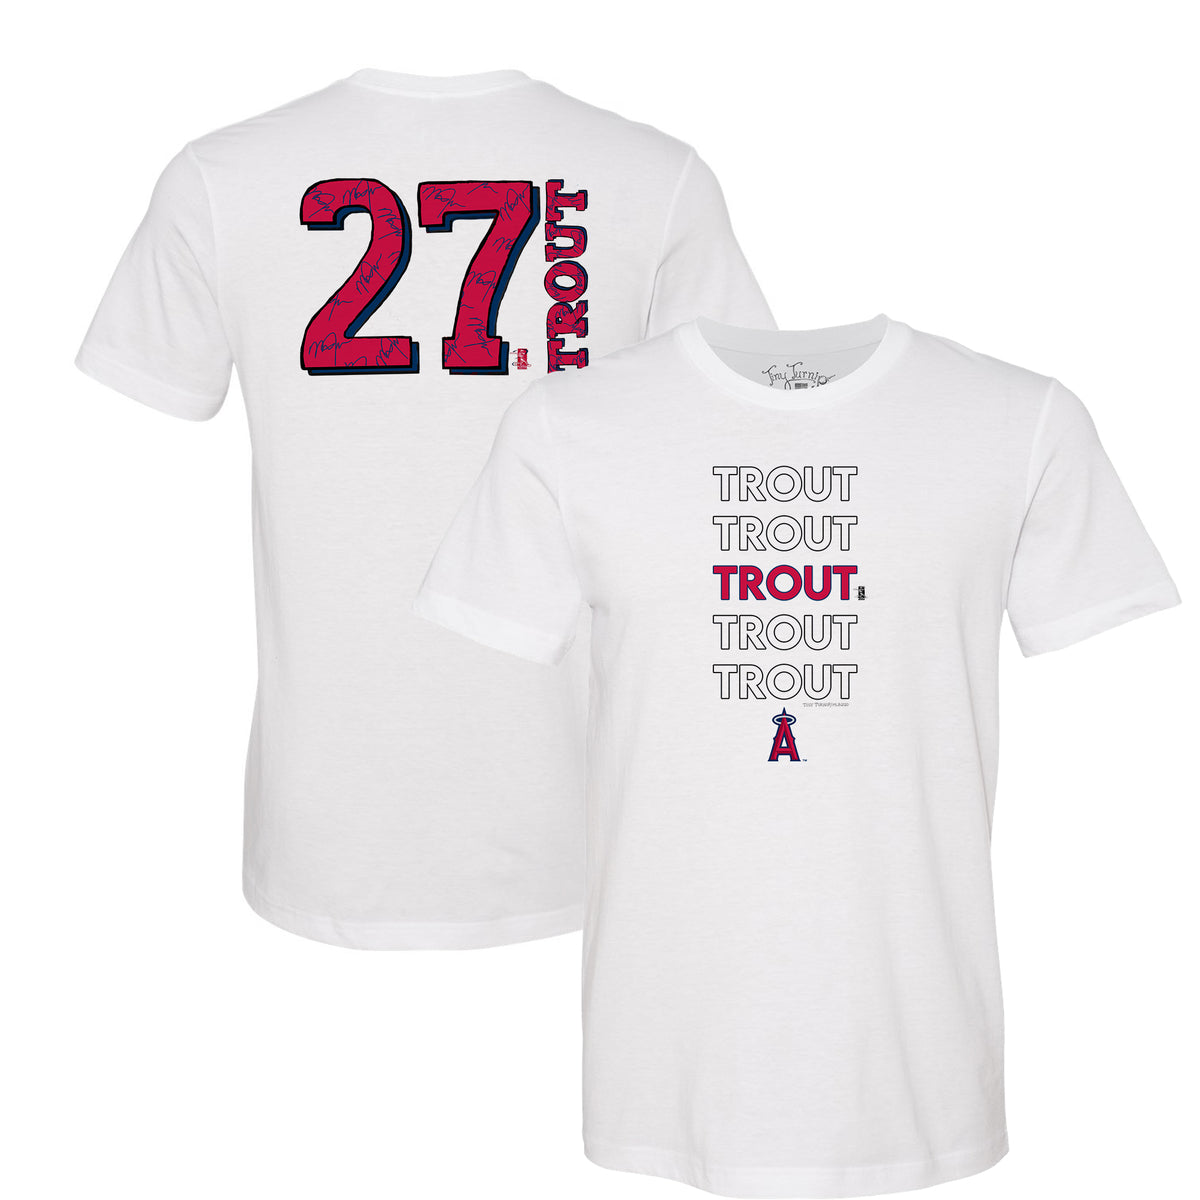 Los Angeles Angels Mike Trout Stacked Tee Shirt